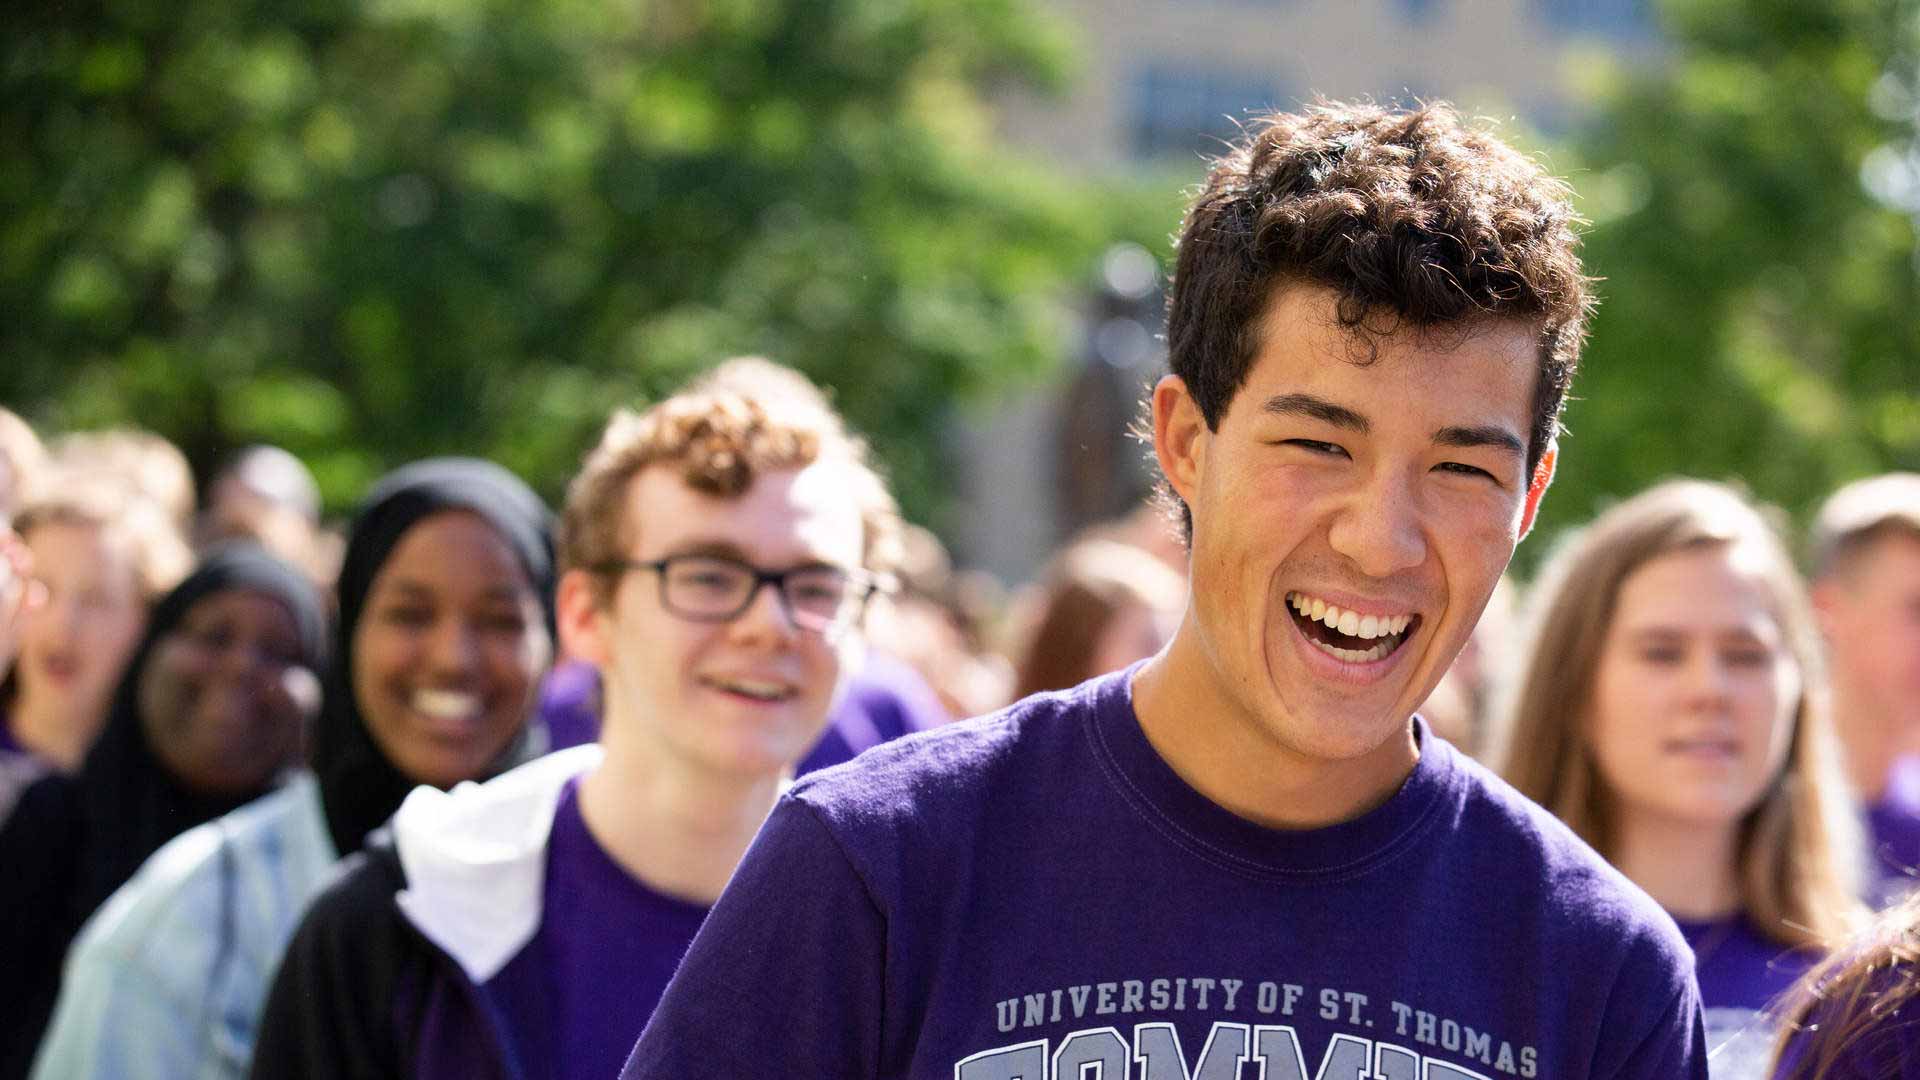 Closeup on a student smiling